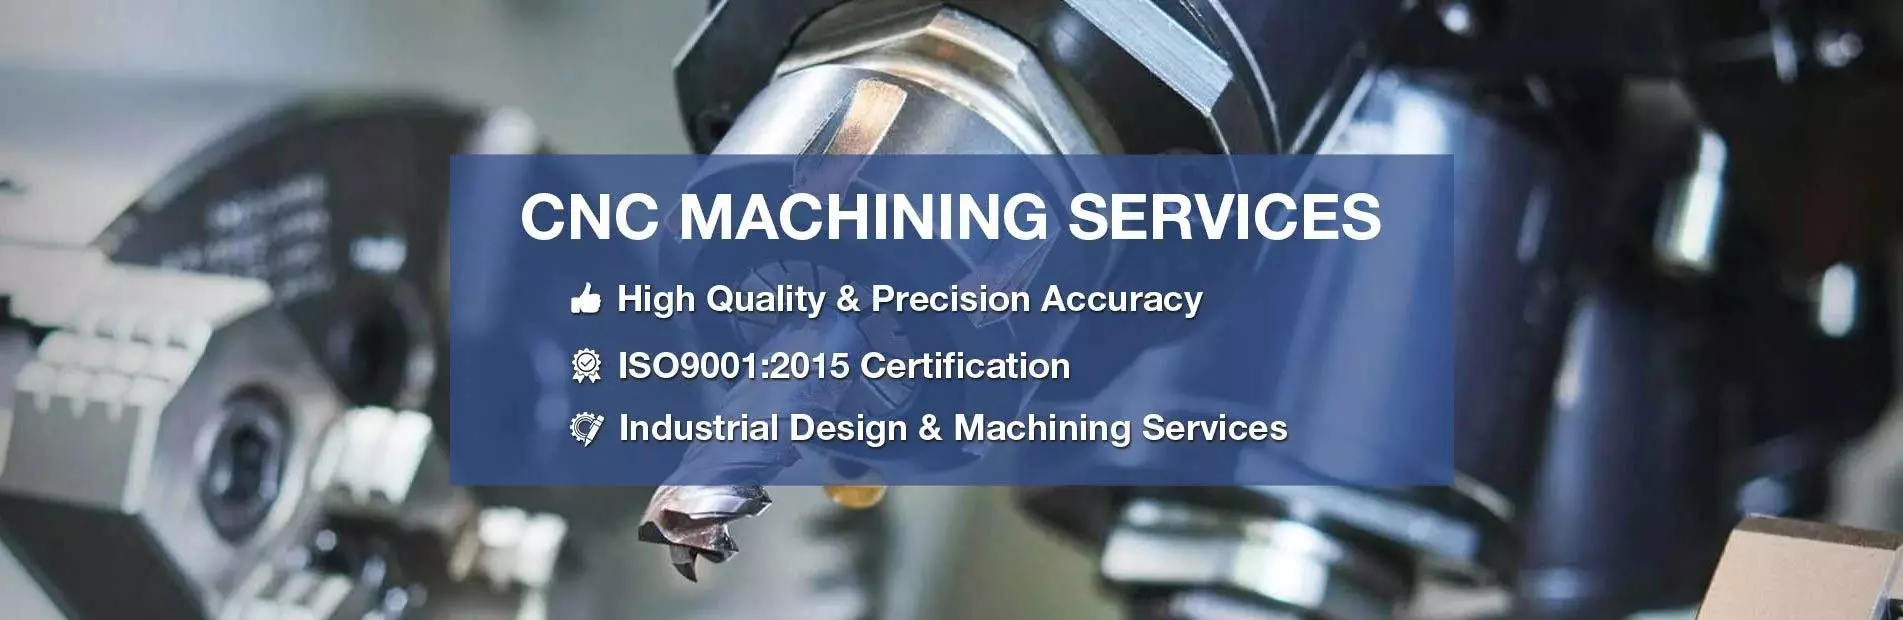 cnc-machining-services-banner